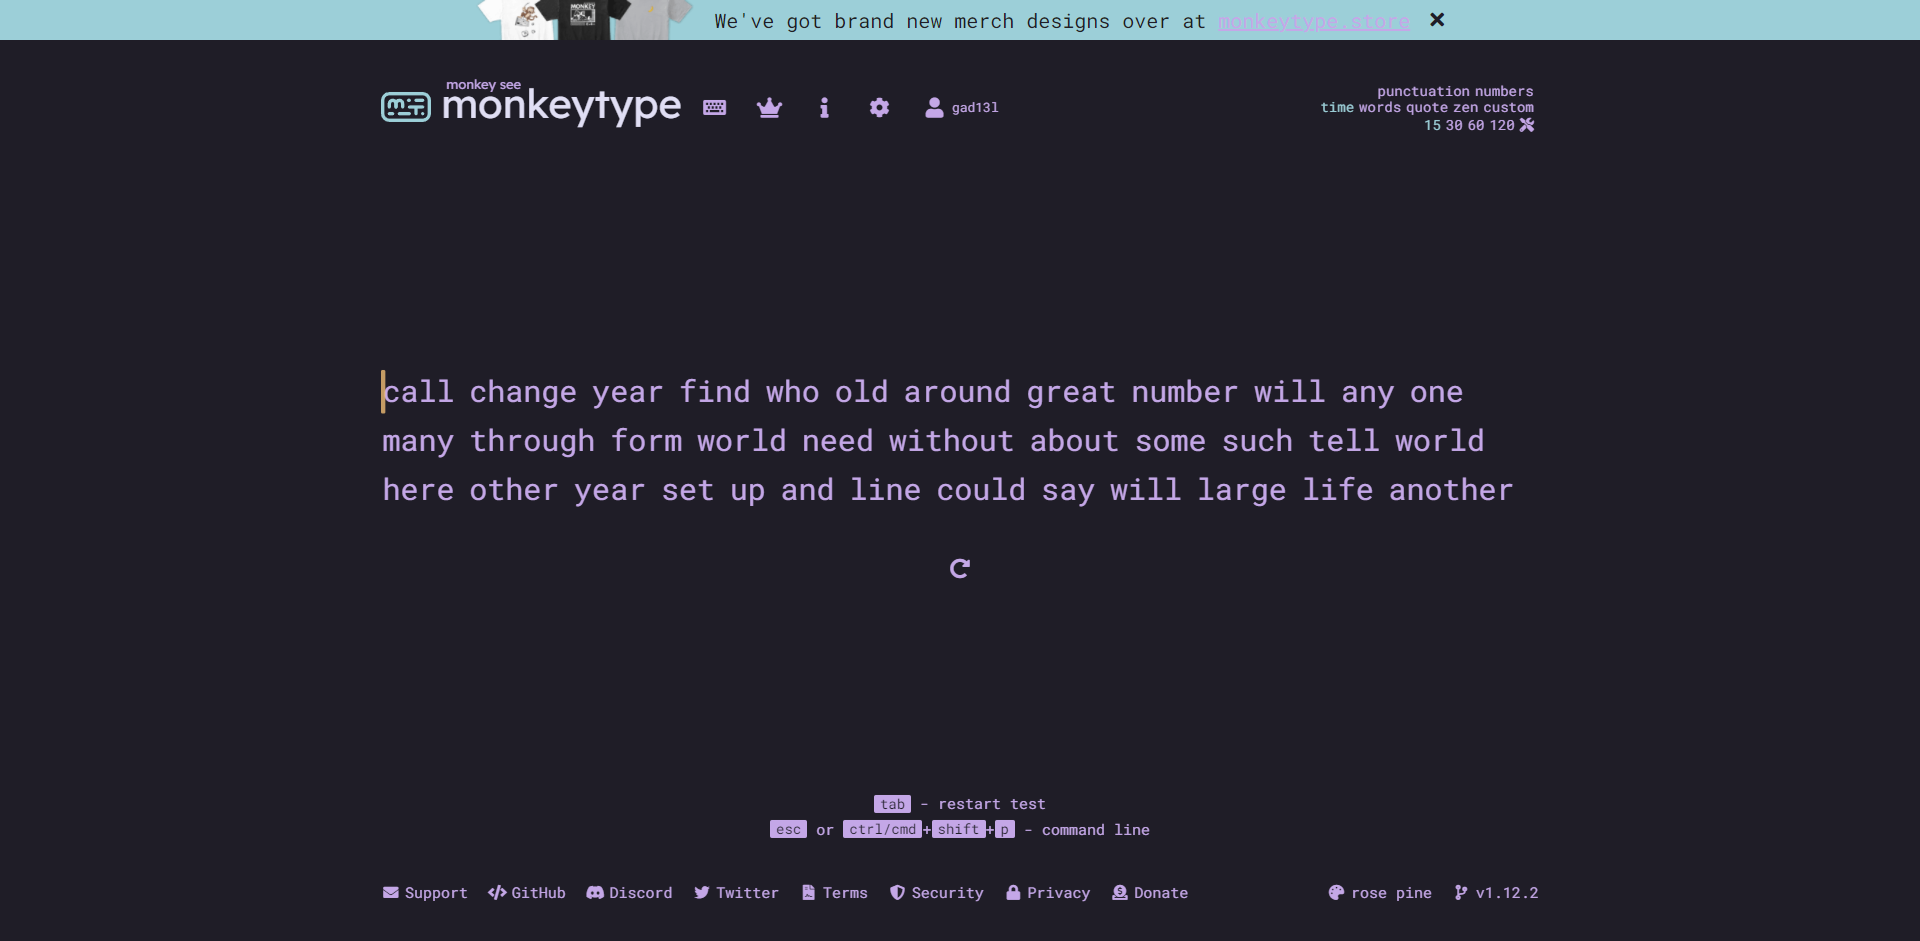 monkeytype.com Reviews  Read Customer Service Reviews of monkeytype.com